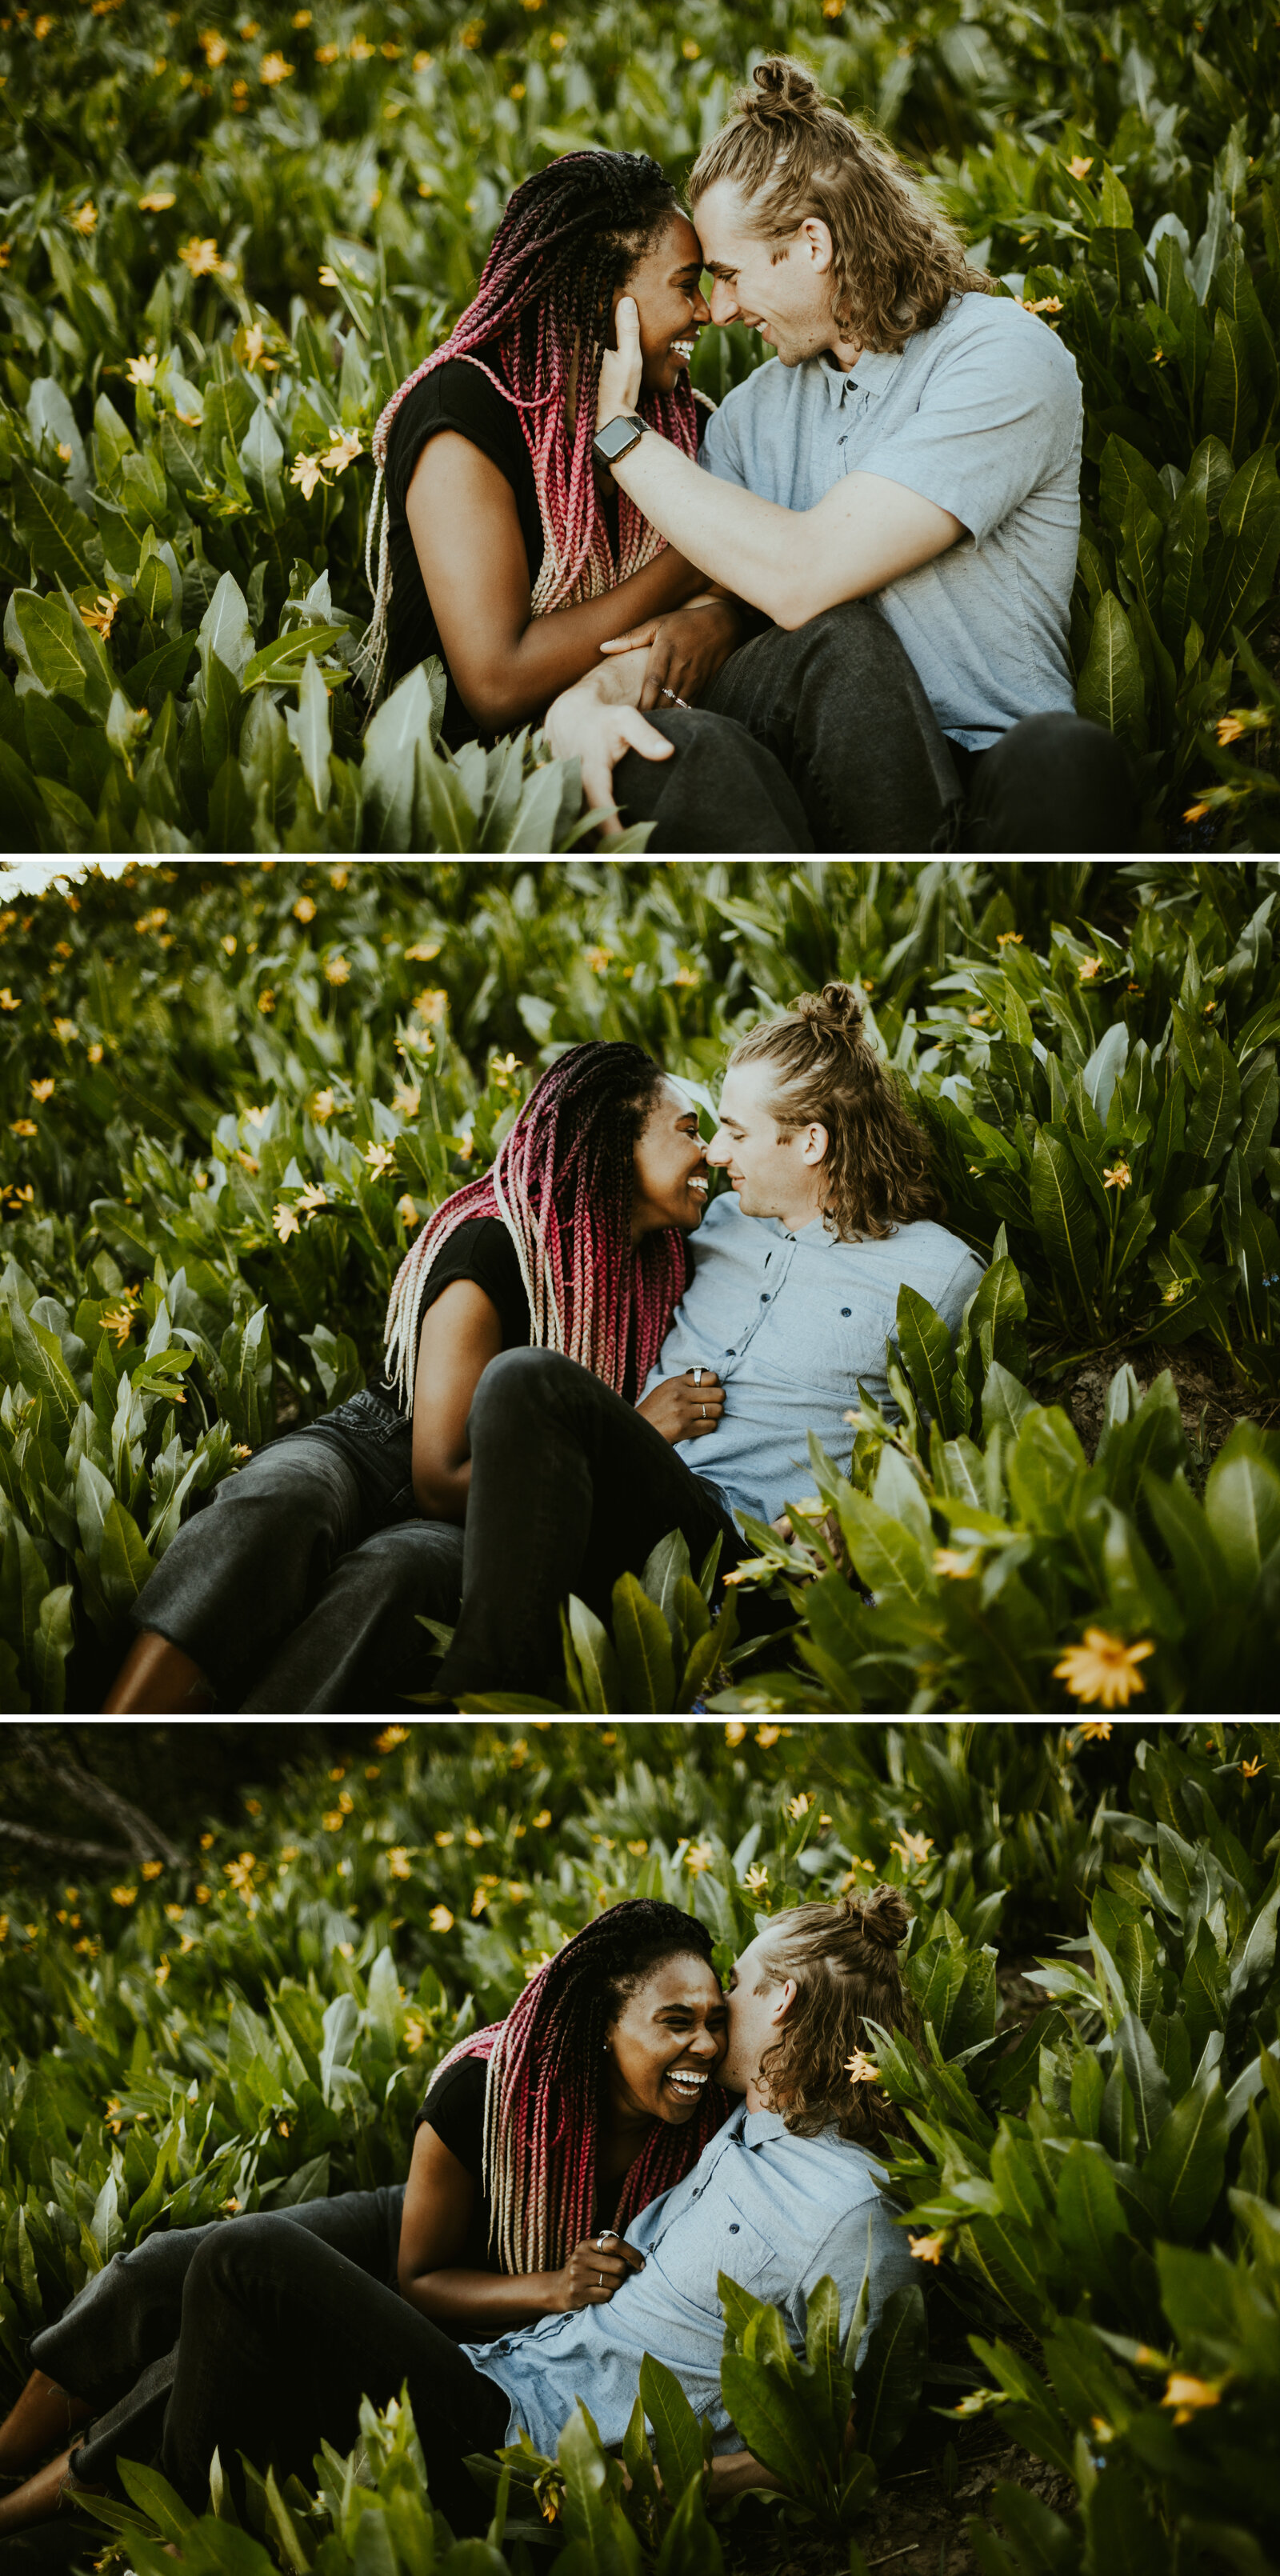 Couple snuggling in a field of yellow flowers woman has pink hair.jpg